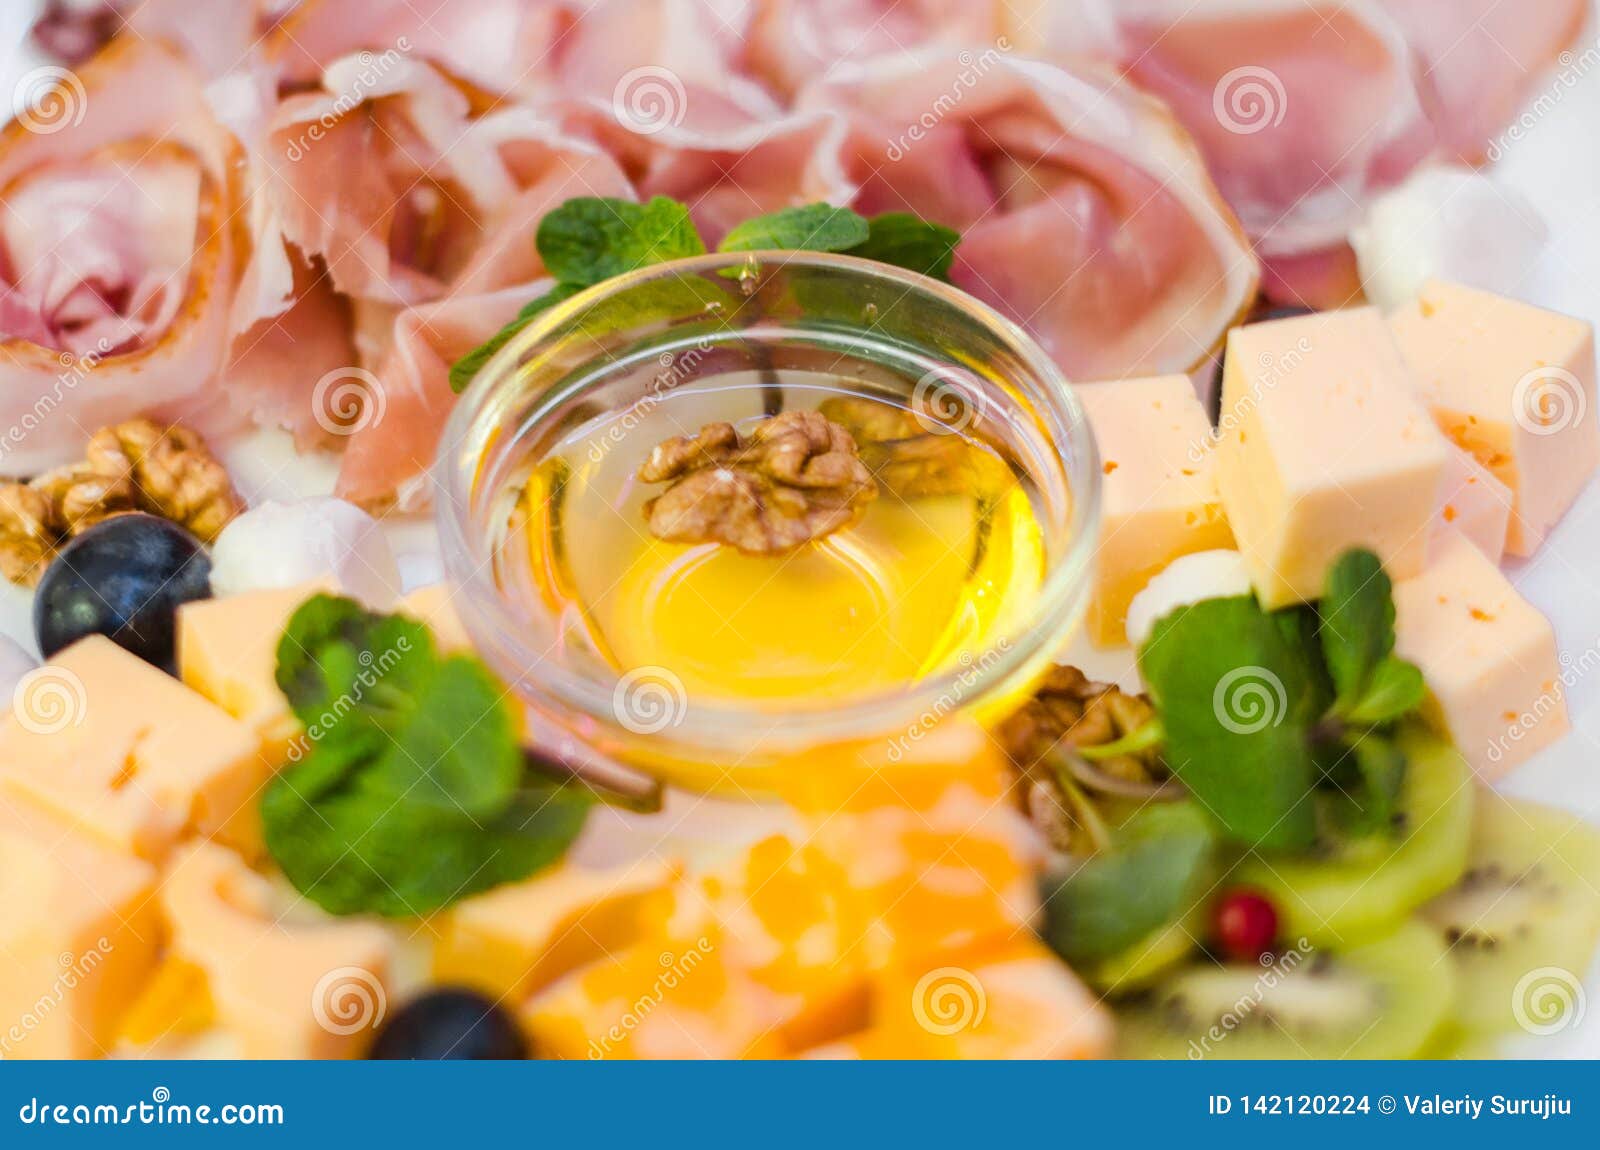 A Plate Filled With Food On The Table Stock Photo Image Of Holiday